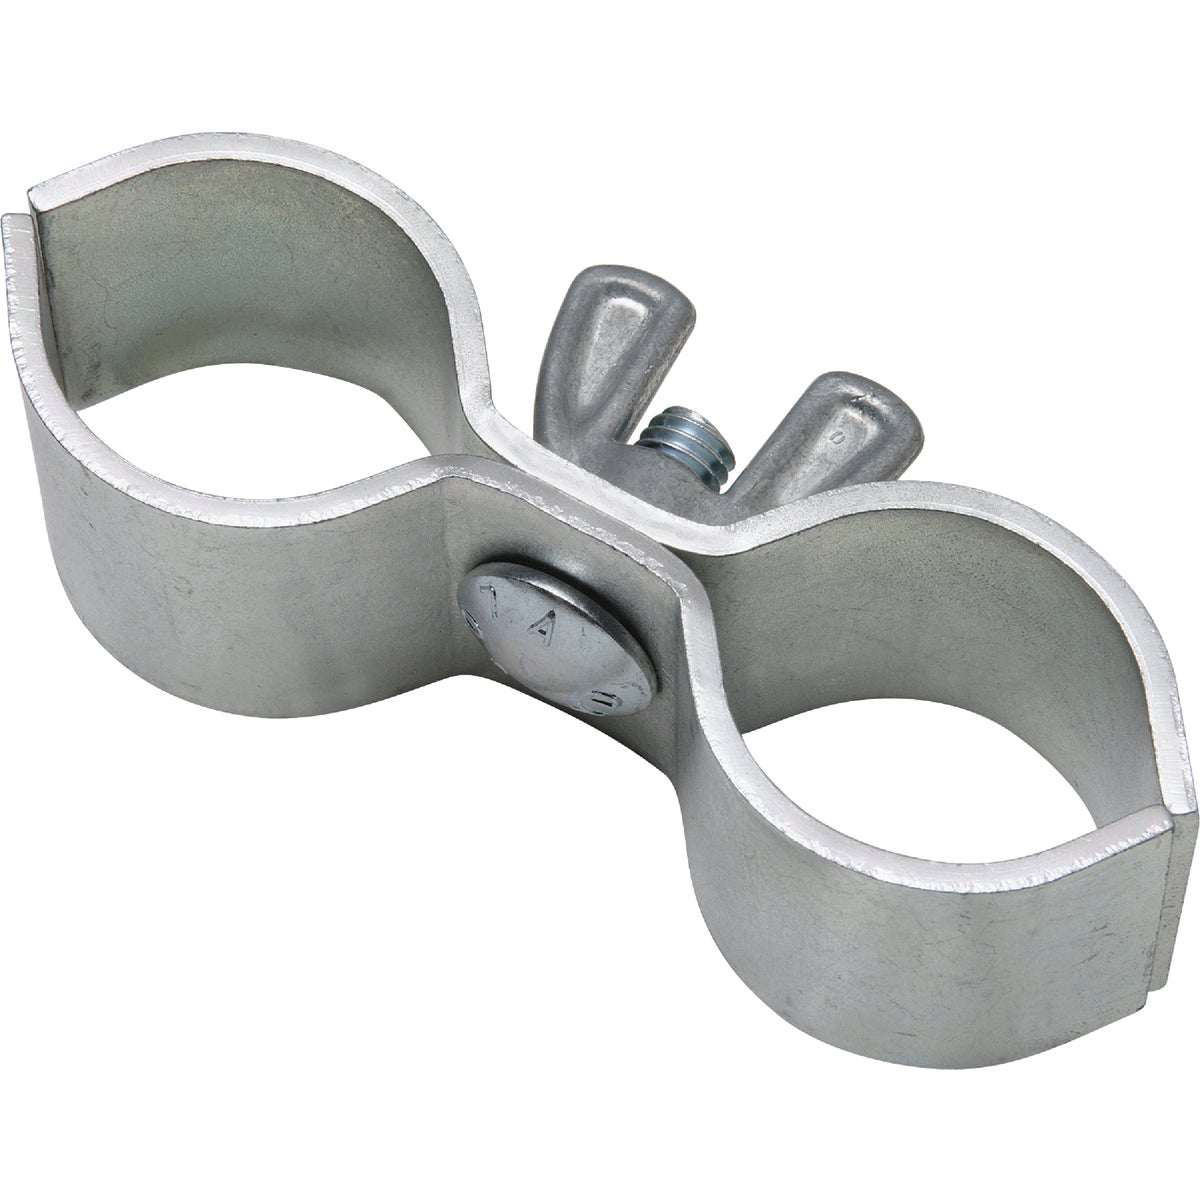 Item 201531, National catalog model No. 300BC pipe clamp in Zinc plated.